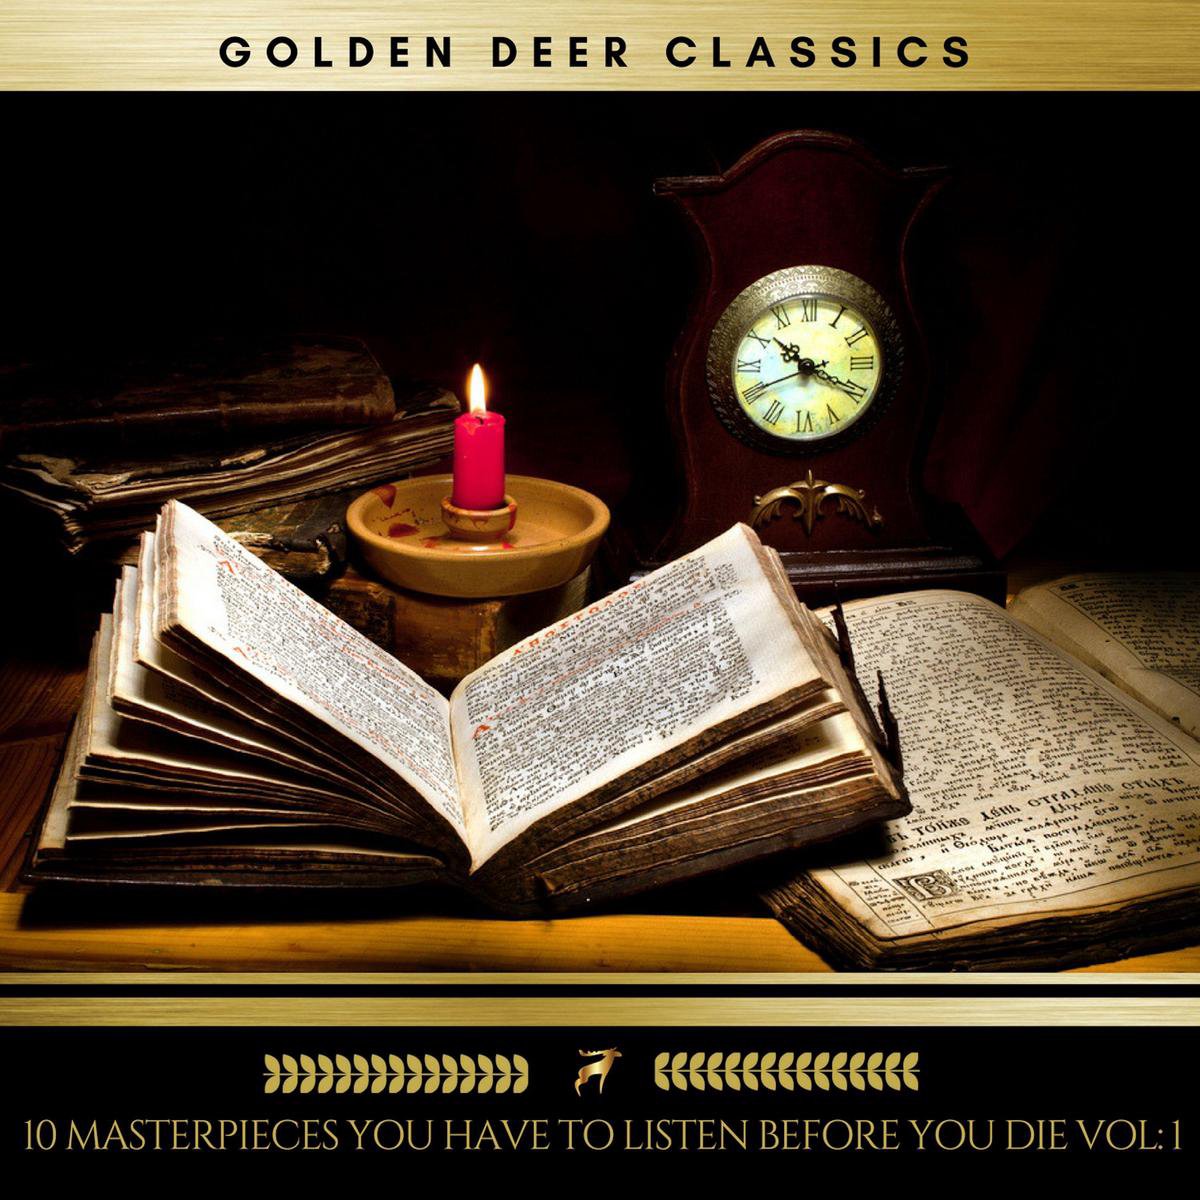 10 Masterpieces you have to listen before you die Vol: 1 (Golden Deer Classics) - Charles Dickens